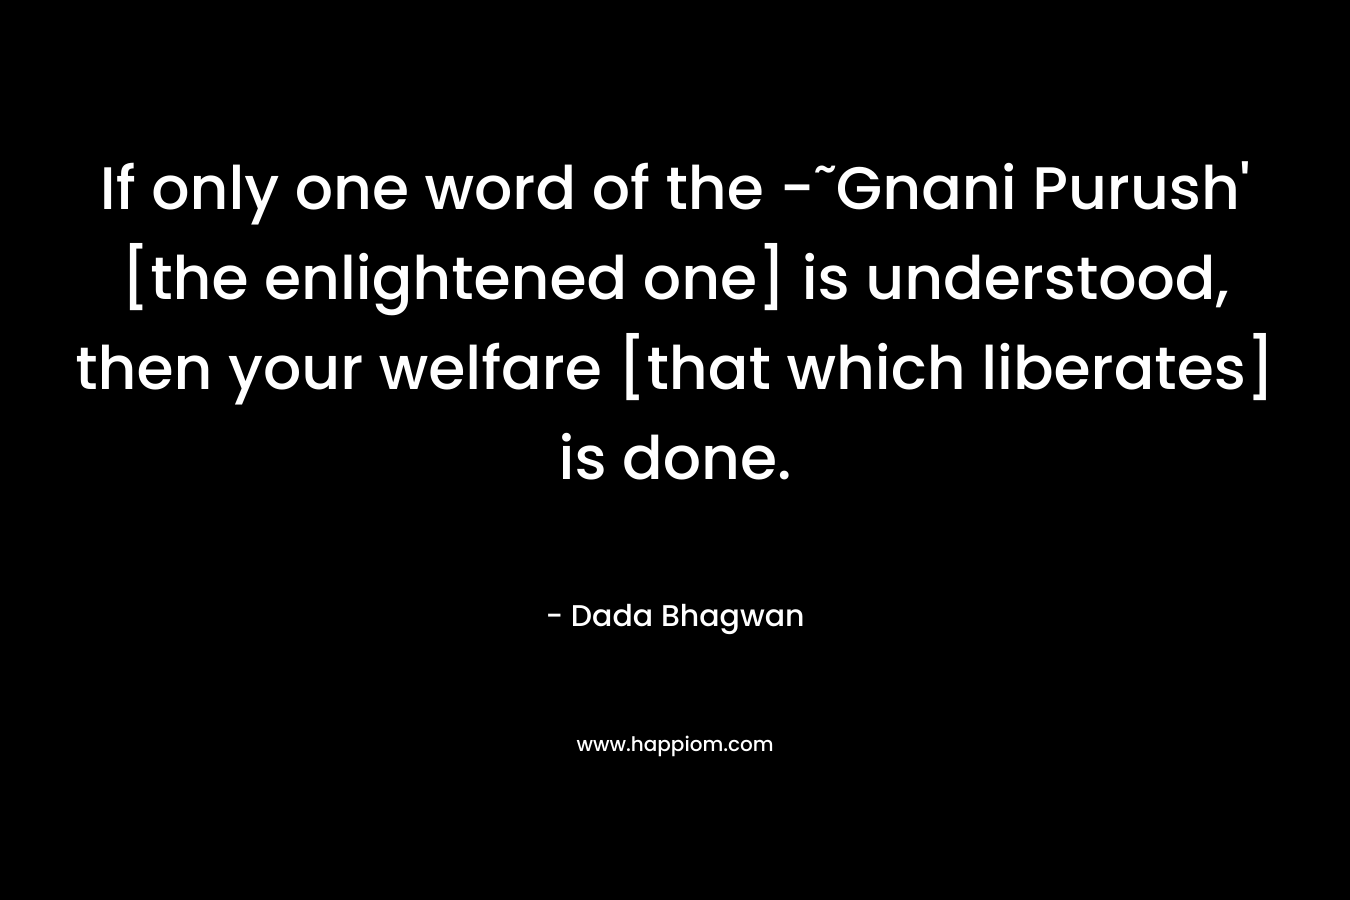 If only one word of the -˜Gnani Purush' [the enlightened one] is understood, then your welfare [that which liberates] is done.